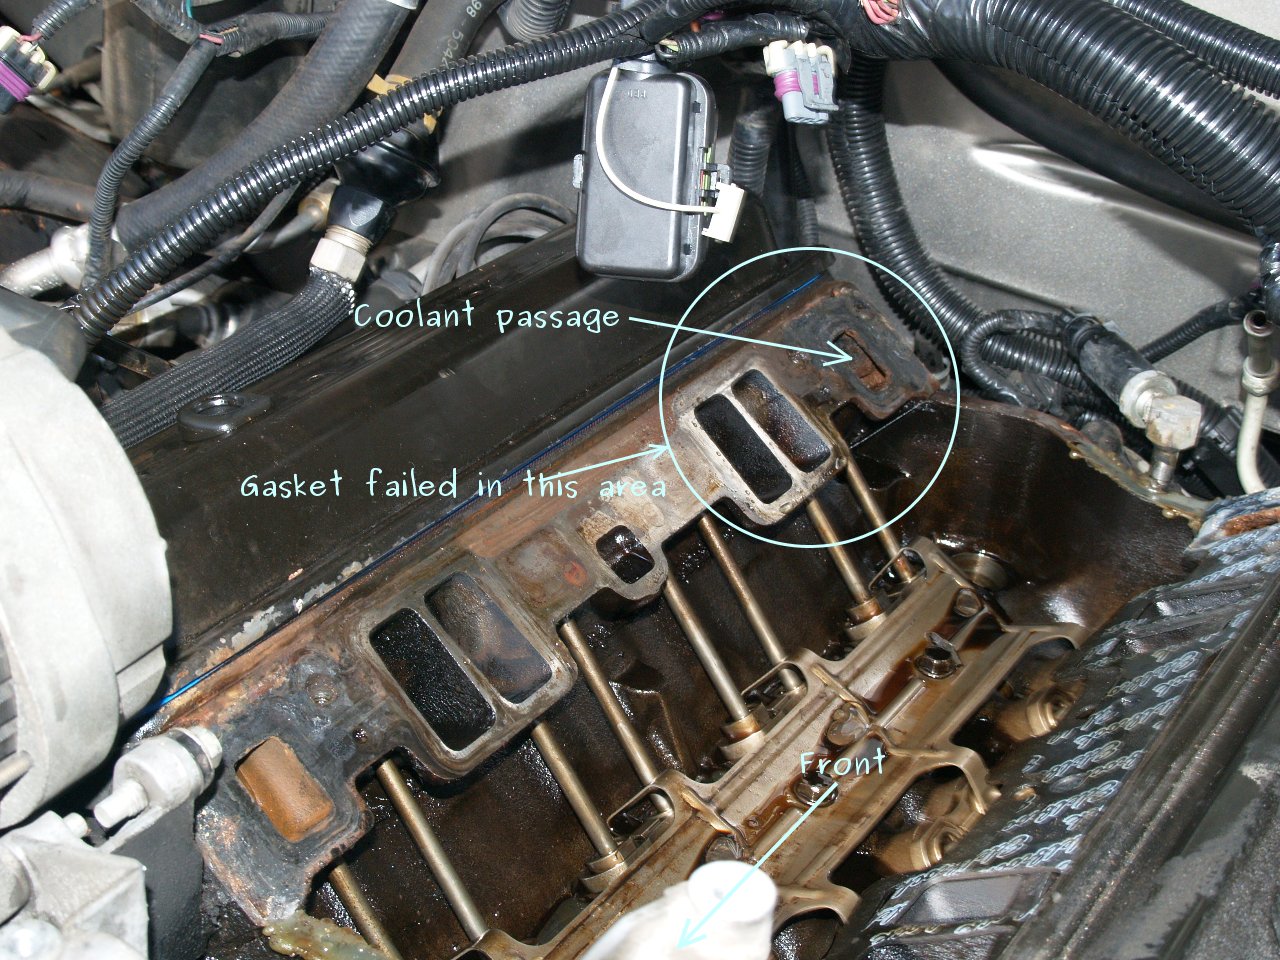 See P086C in engine